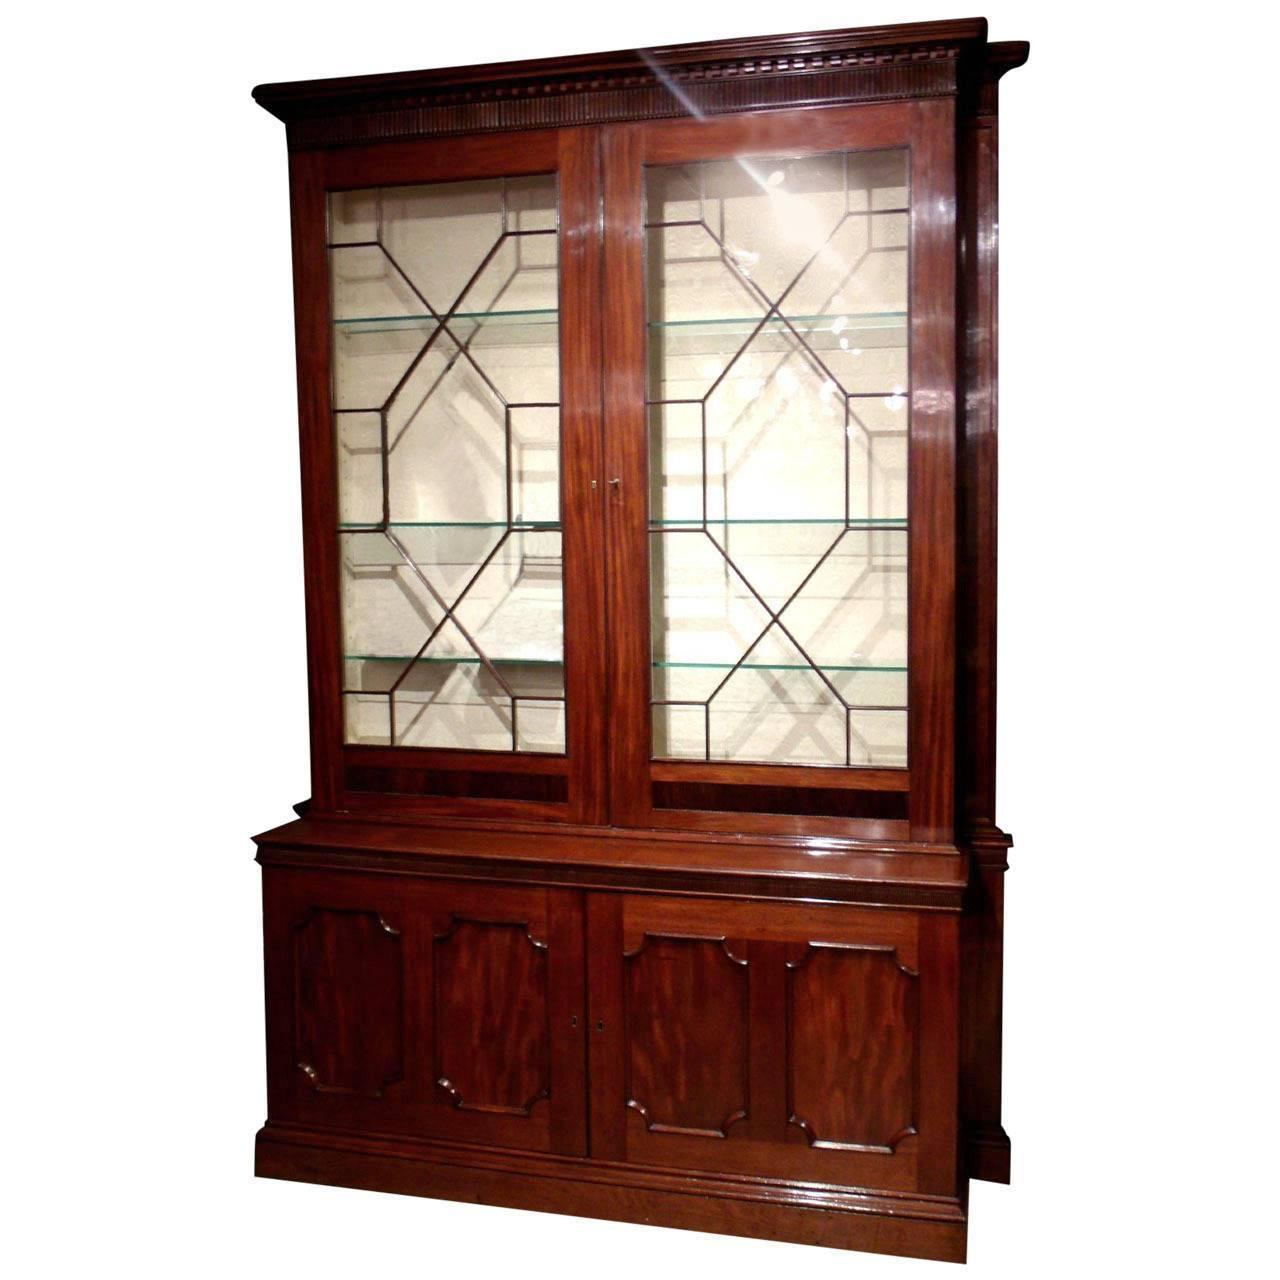 This superb quality and imposing mahogany bookcase with dentil cornice detailing has providence from Cound Hall in Shropshire. The top half of the bookcase is lined in a cream moiré silk with Astragal glazing on the doors and the bottom half